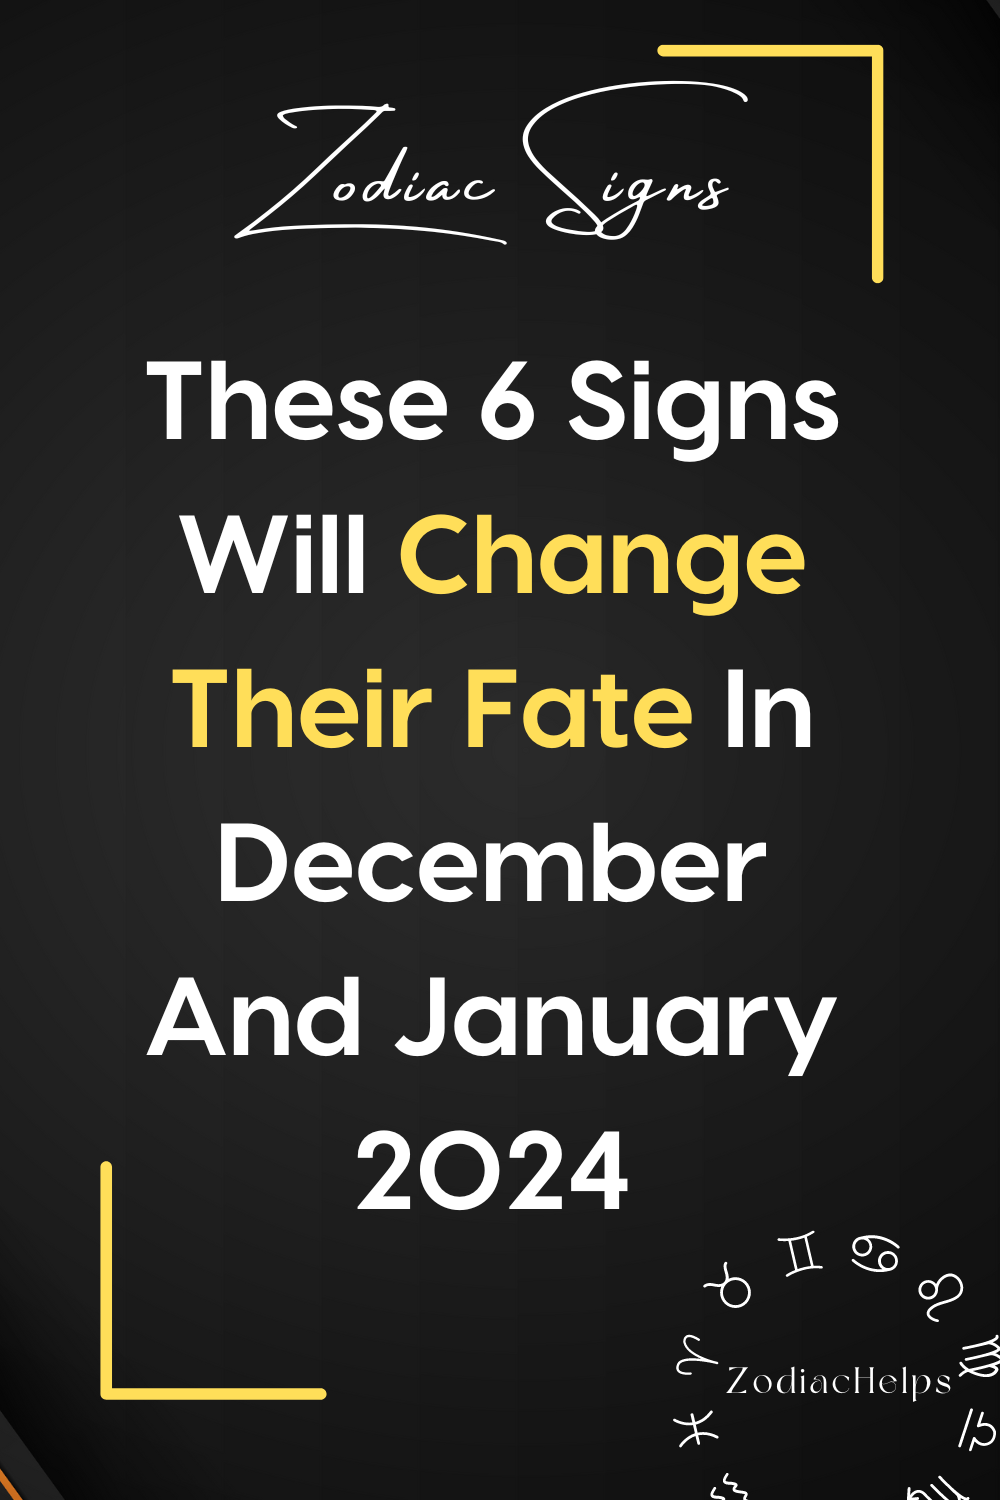 These 6 Signs Will Change Their Fate In December And January 2024